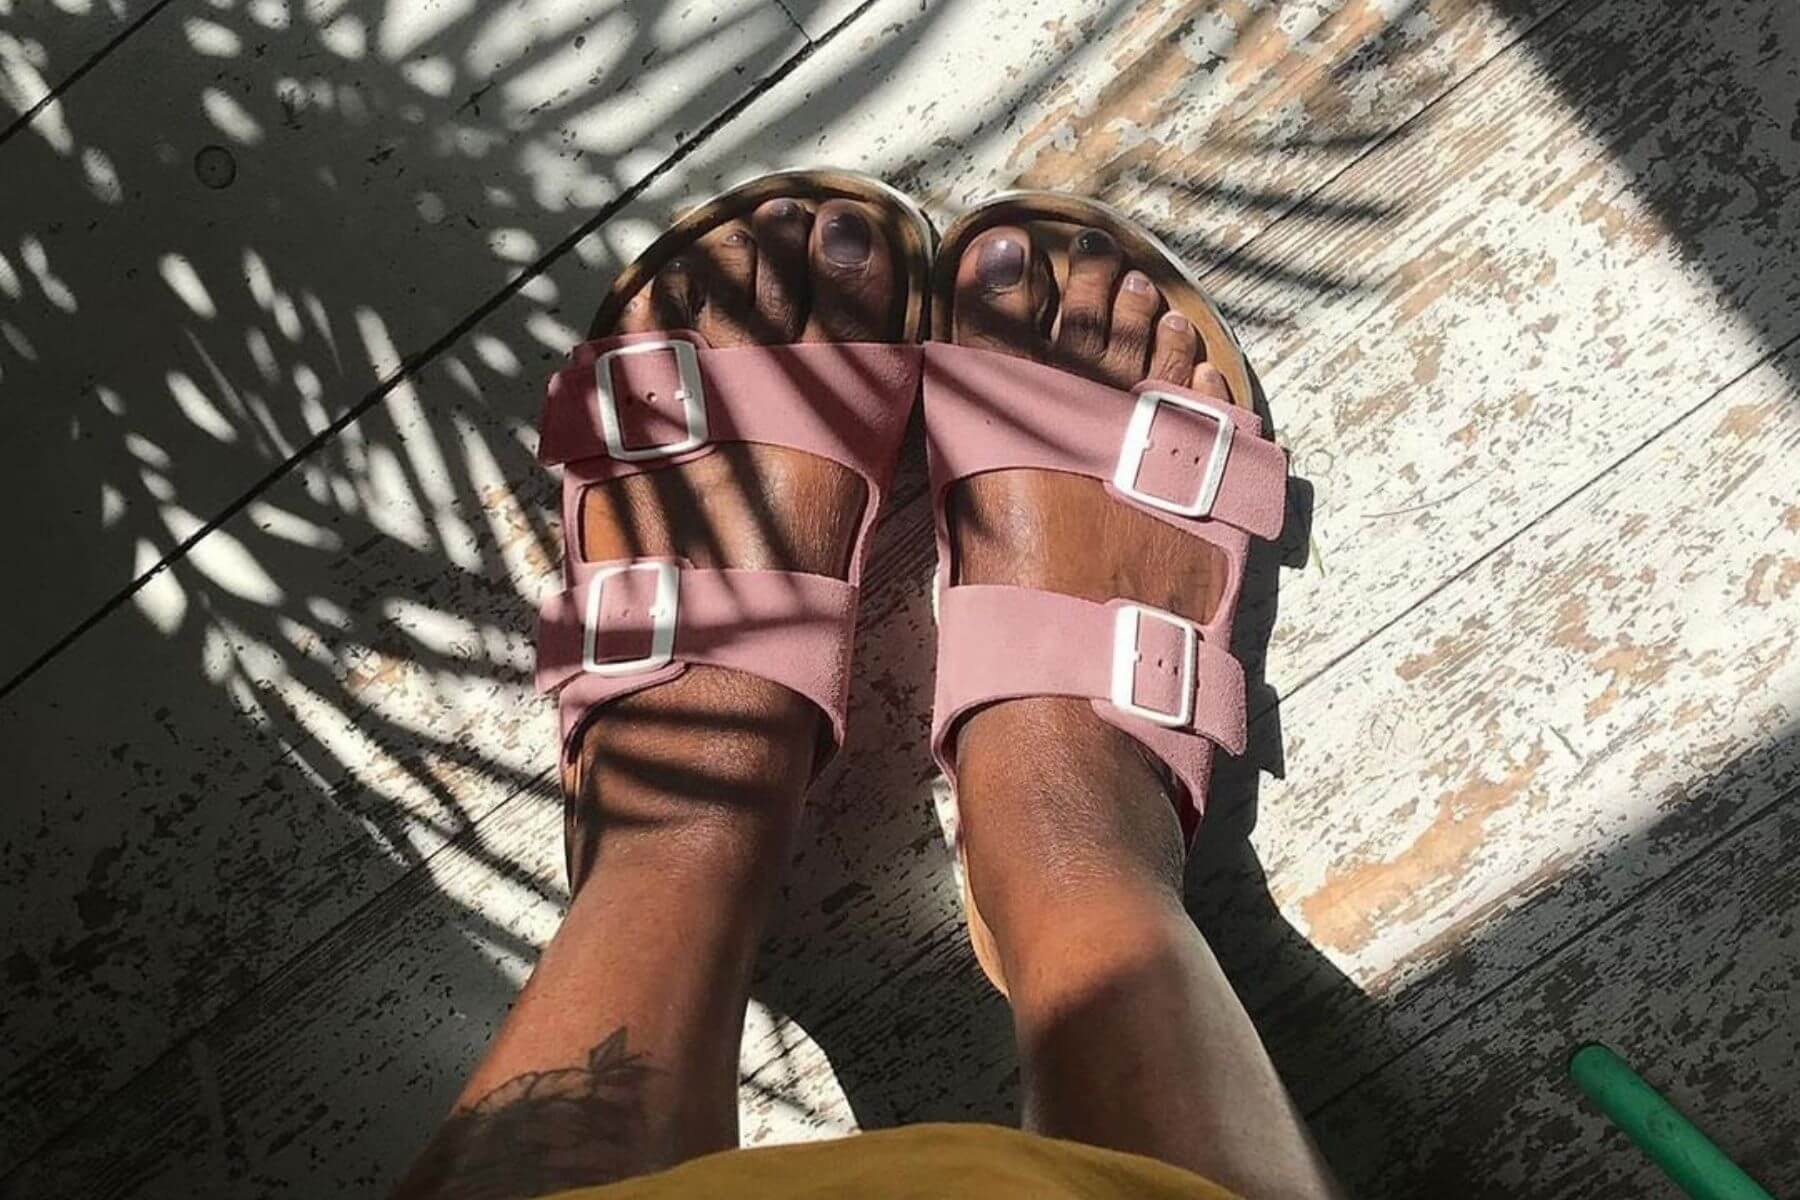 How To Change the Color Of Leather Birkenstocks